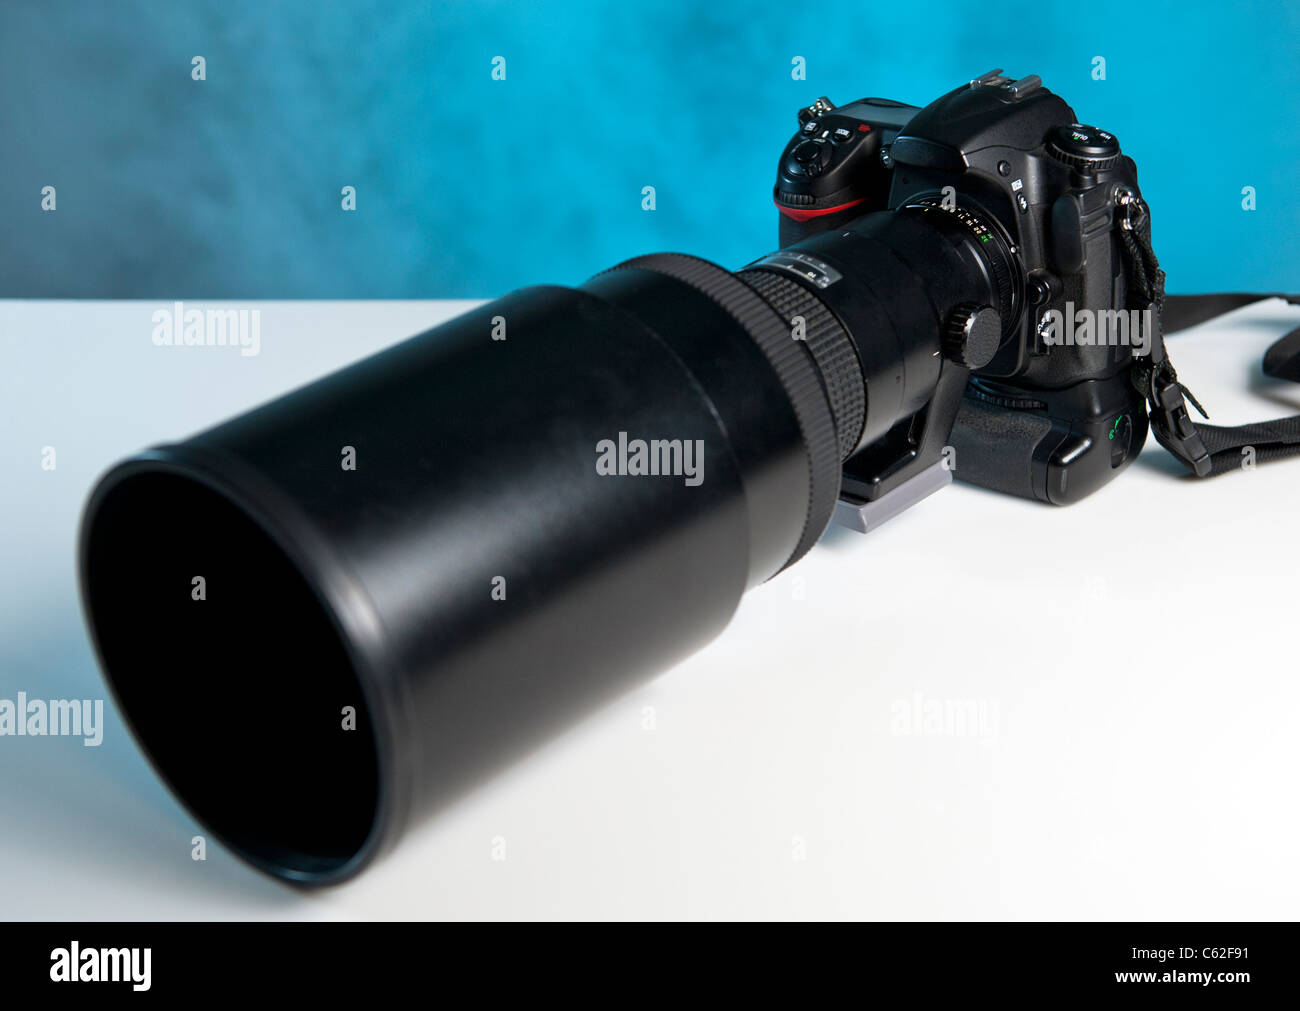 Digital DSLR with a long telephoto lens attached Stock Photo